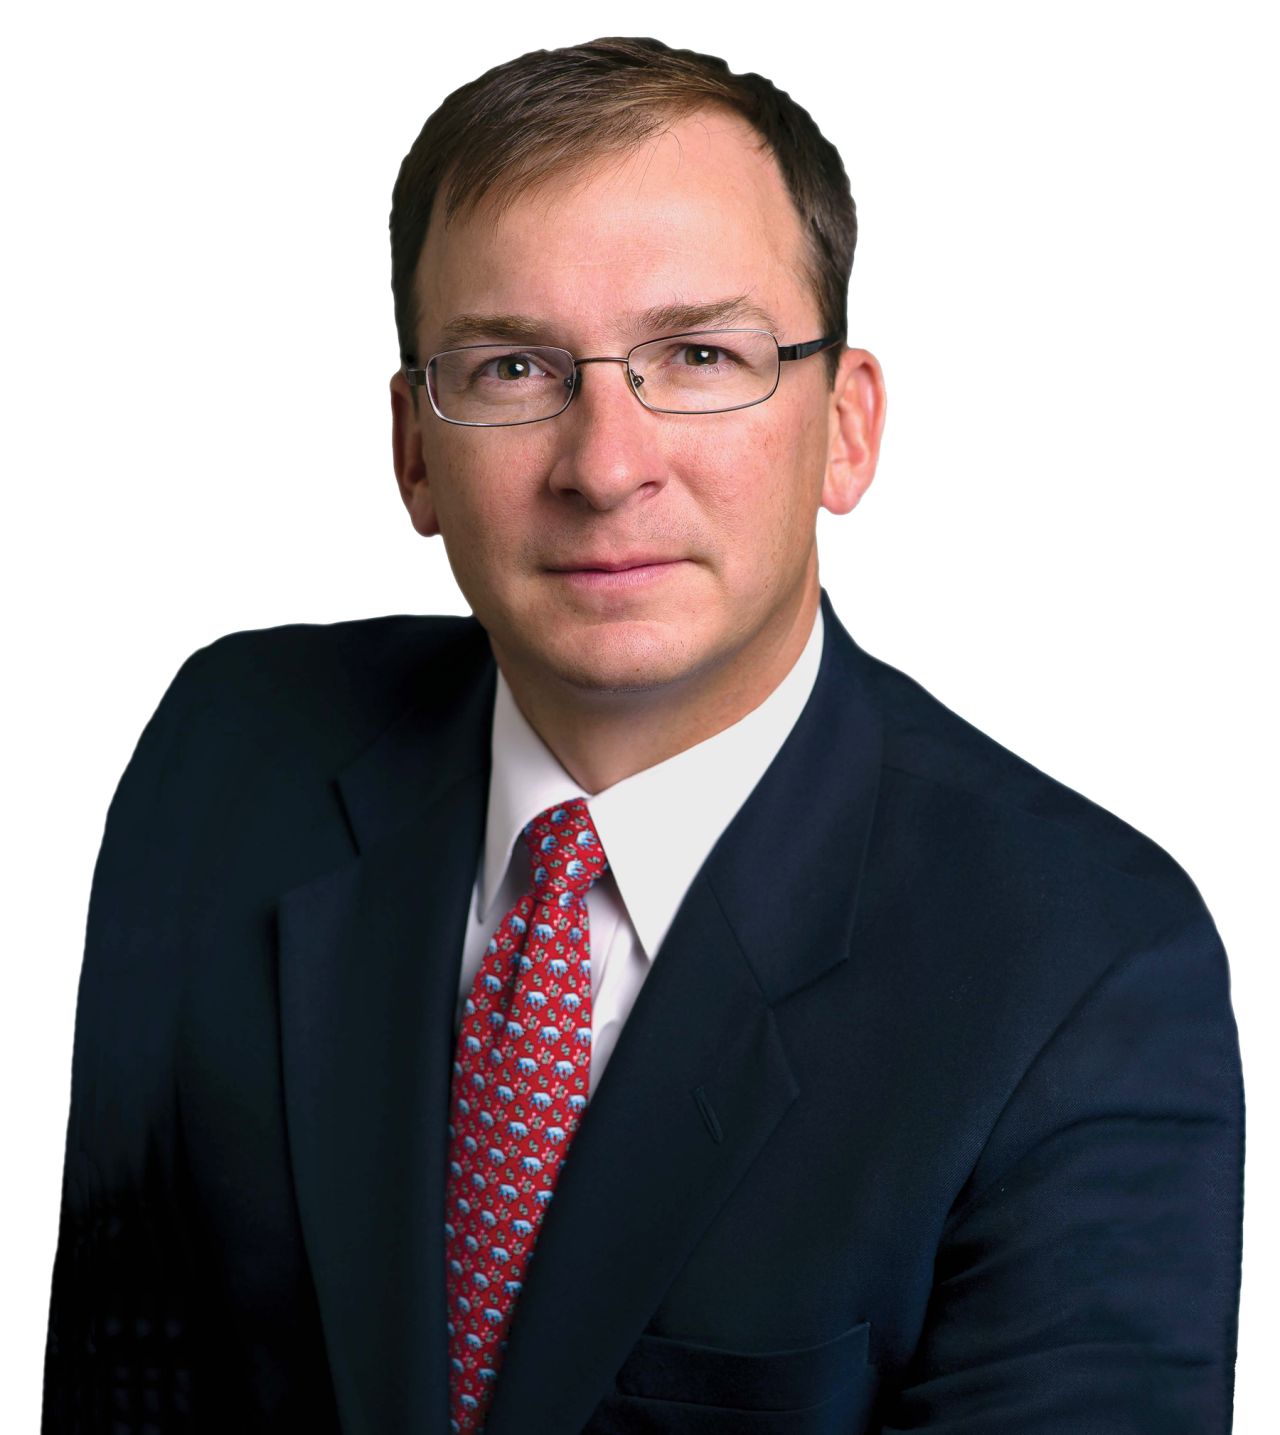 Photo of T. Rowe Price Chief Executive Officer and President Rob Sharps